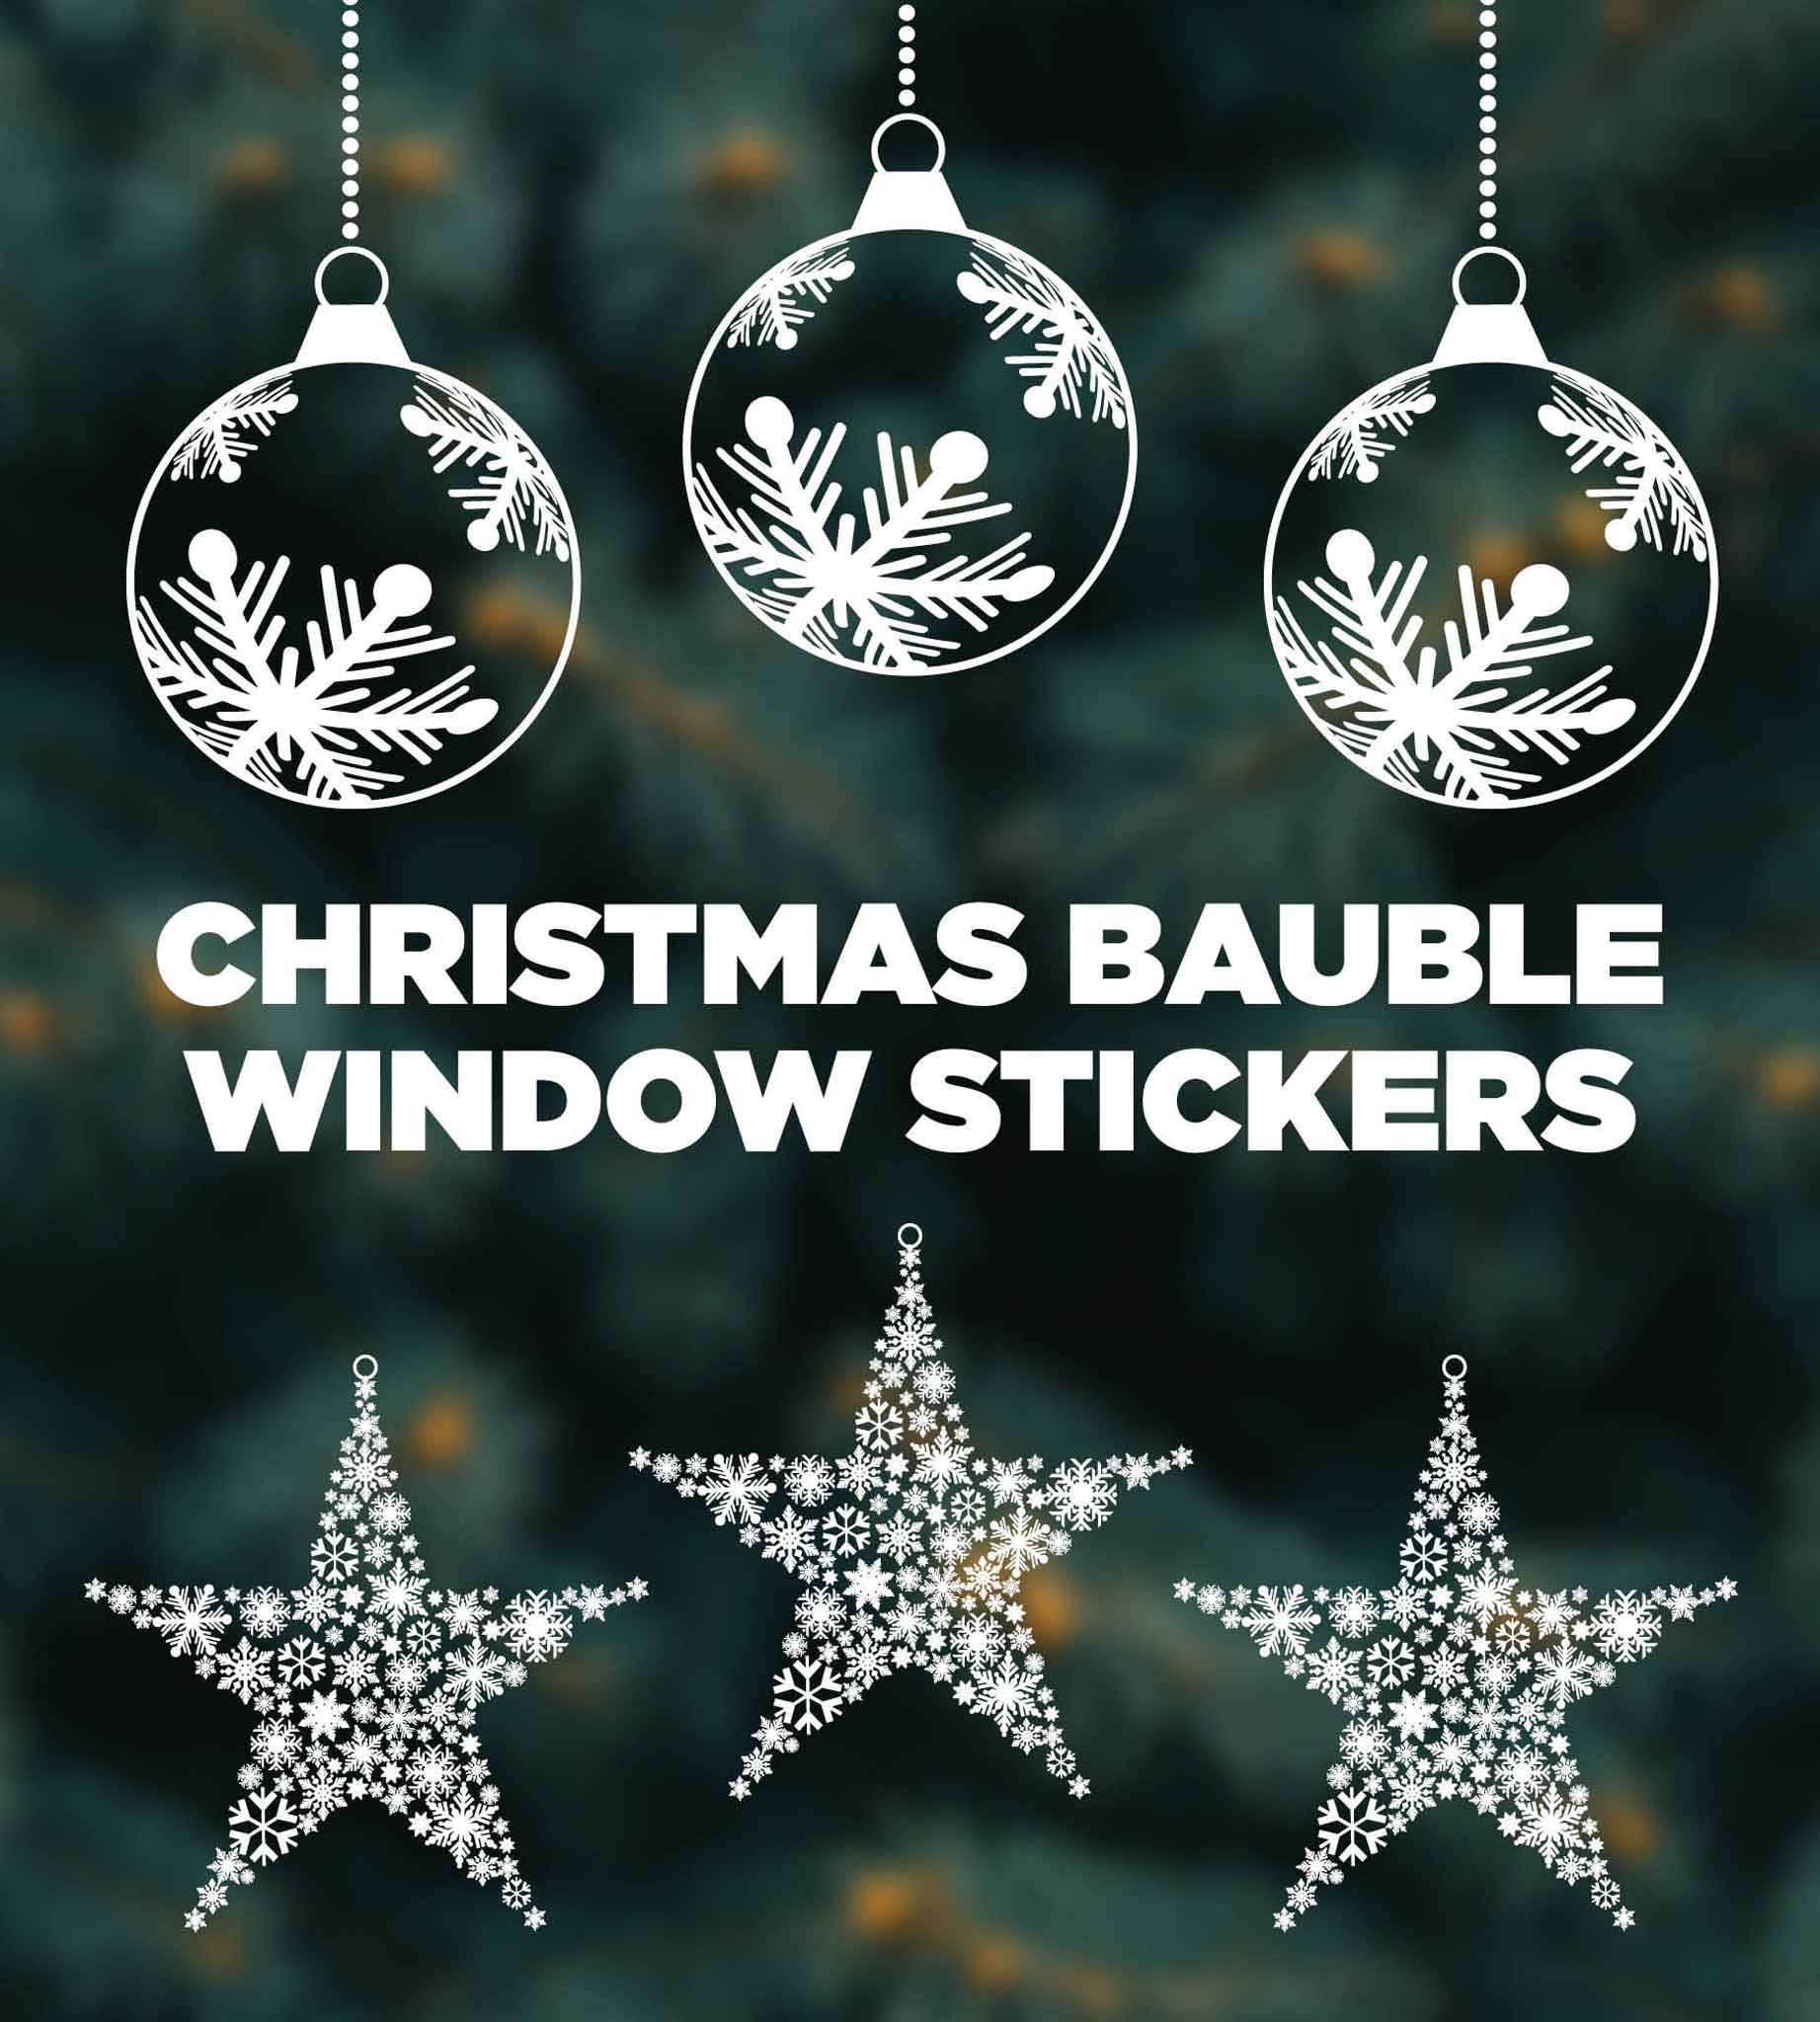 Christmas bauble window cling stickers